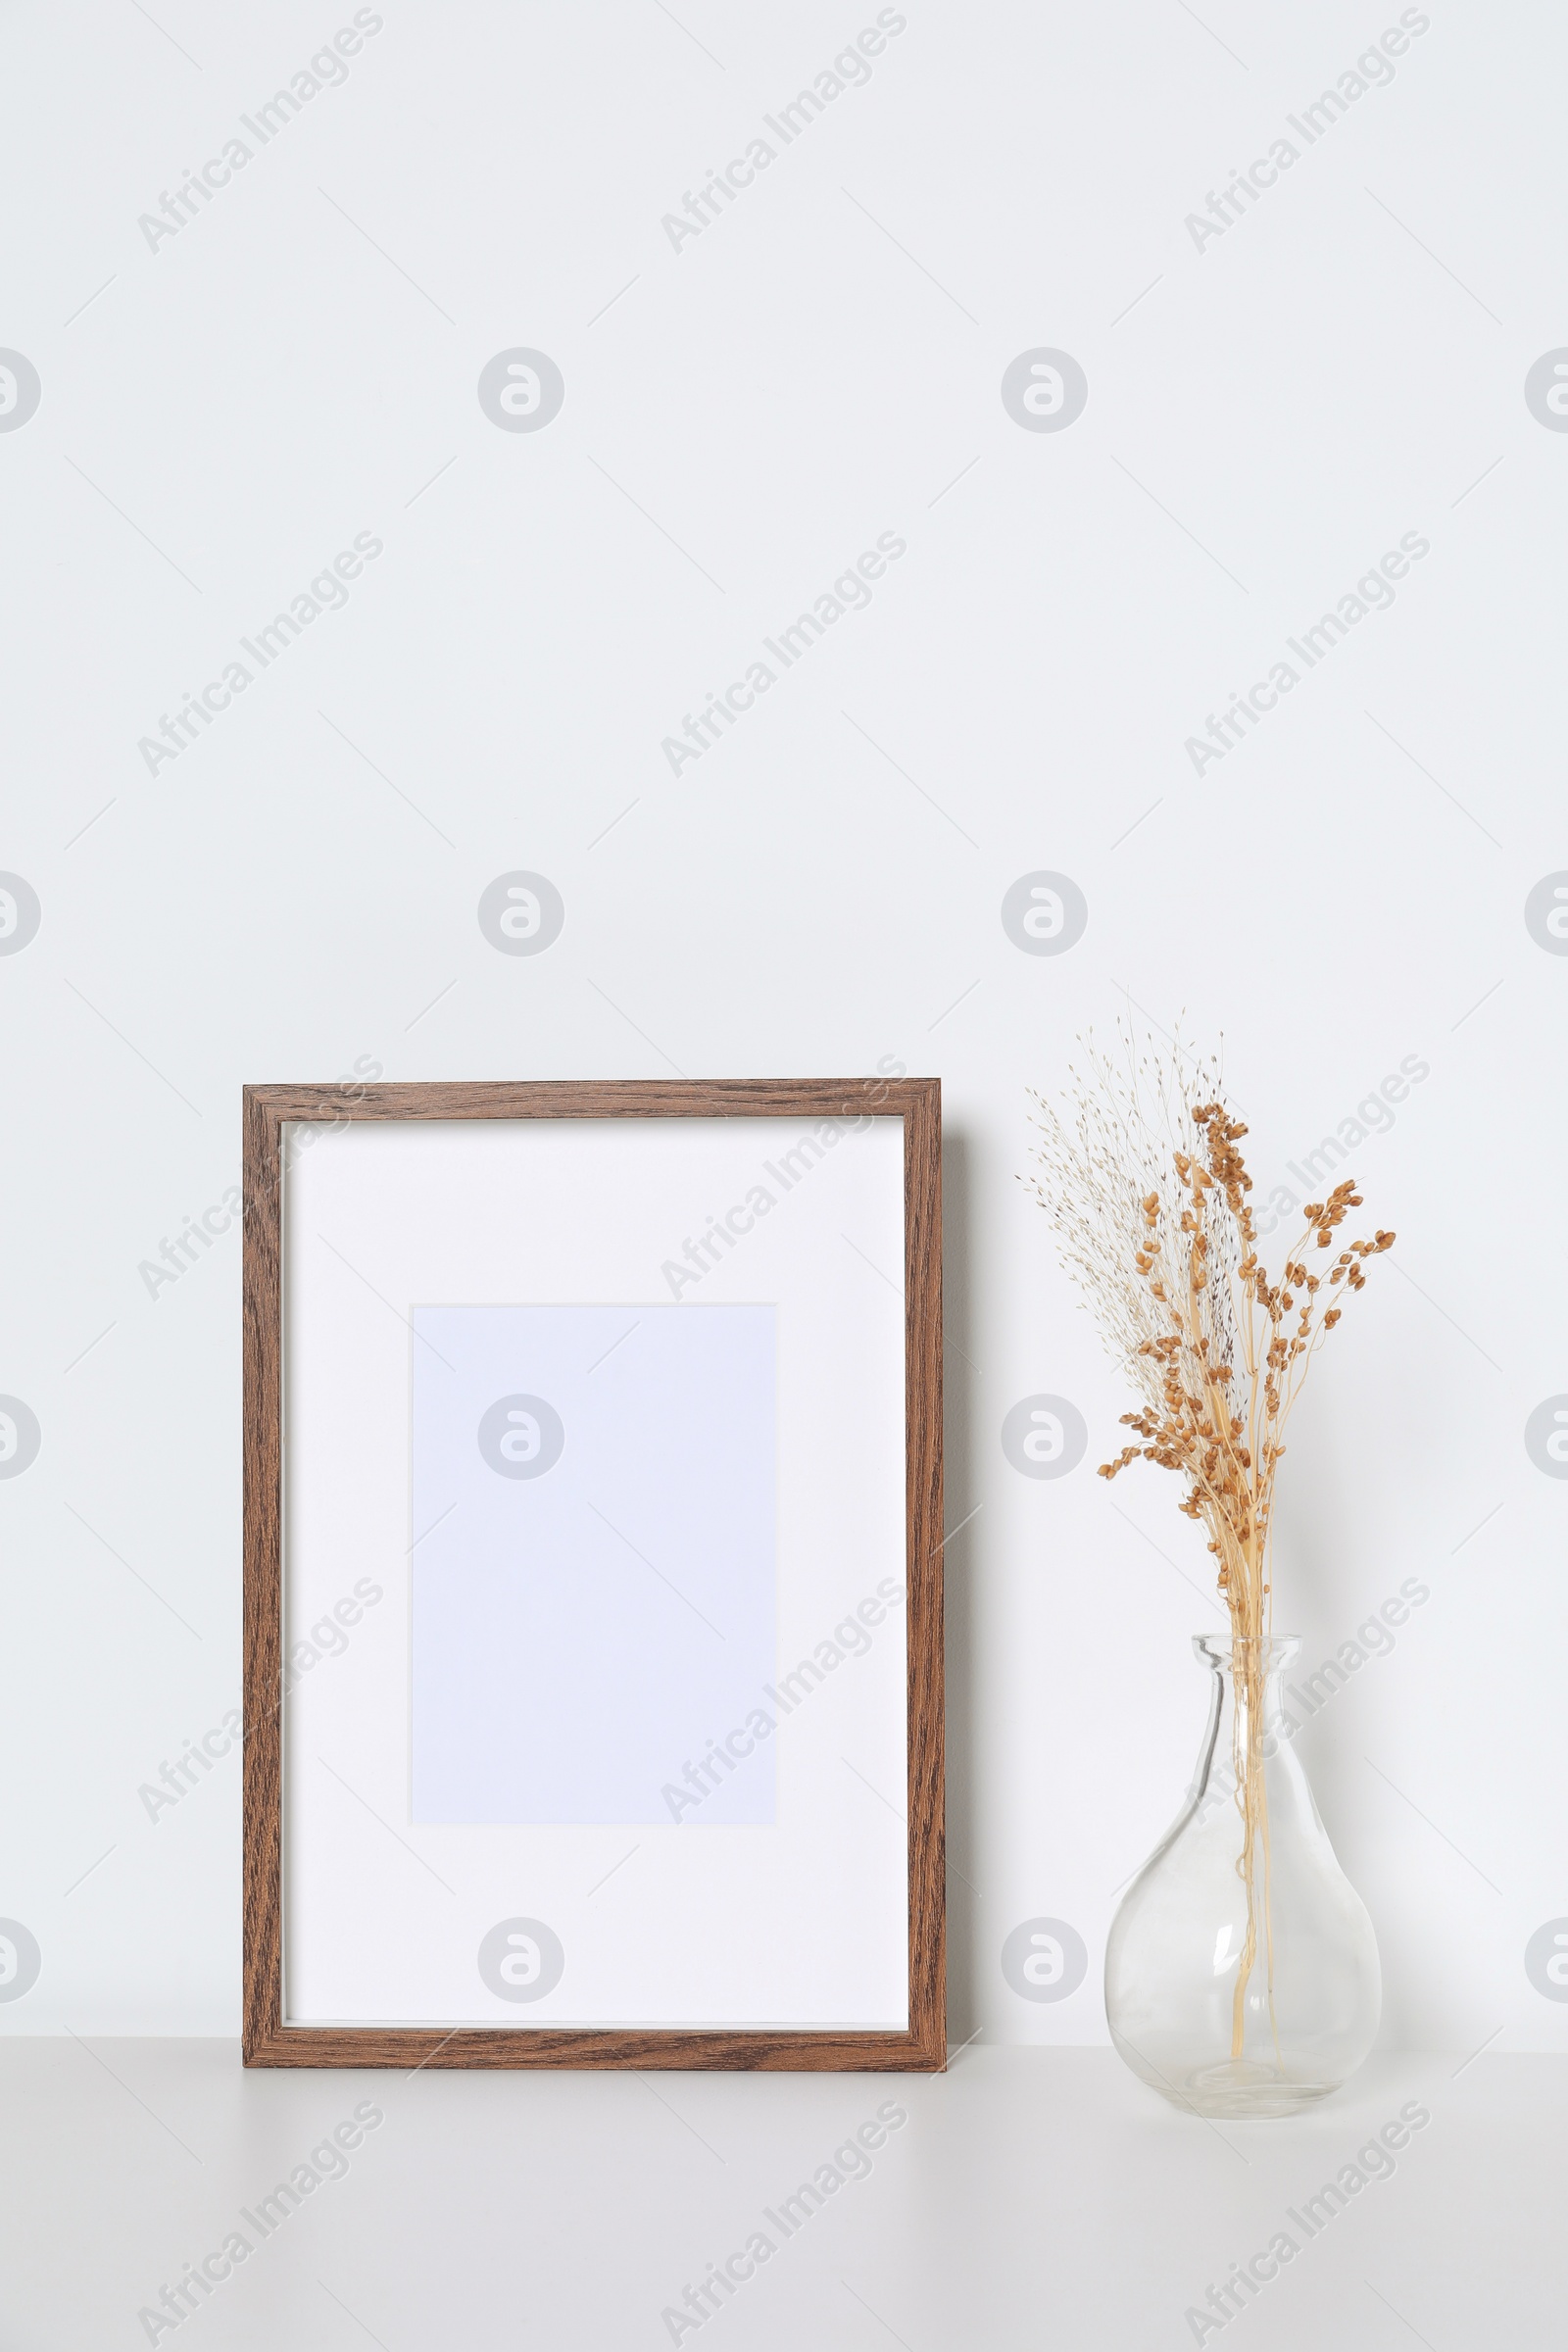 Photo of Empty photo frame and vase with dry decorative flowers on white table. Mockup for design